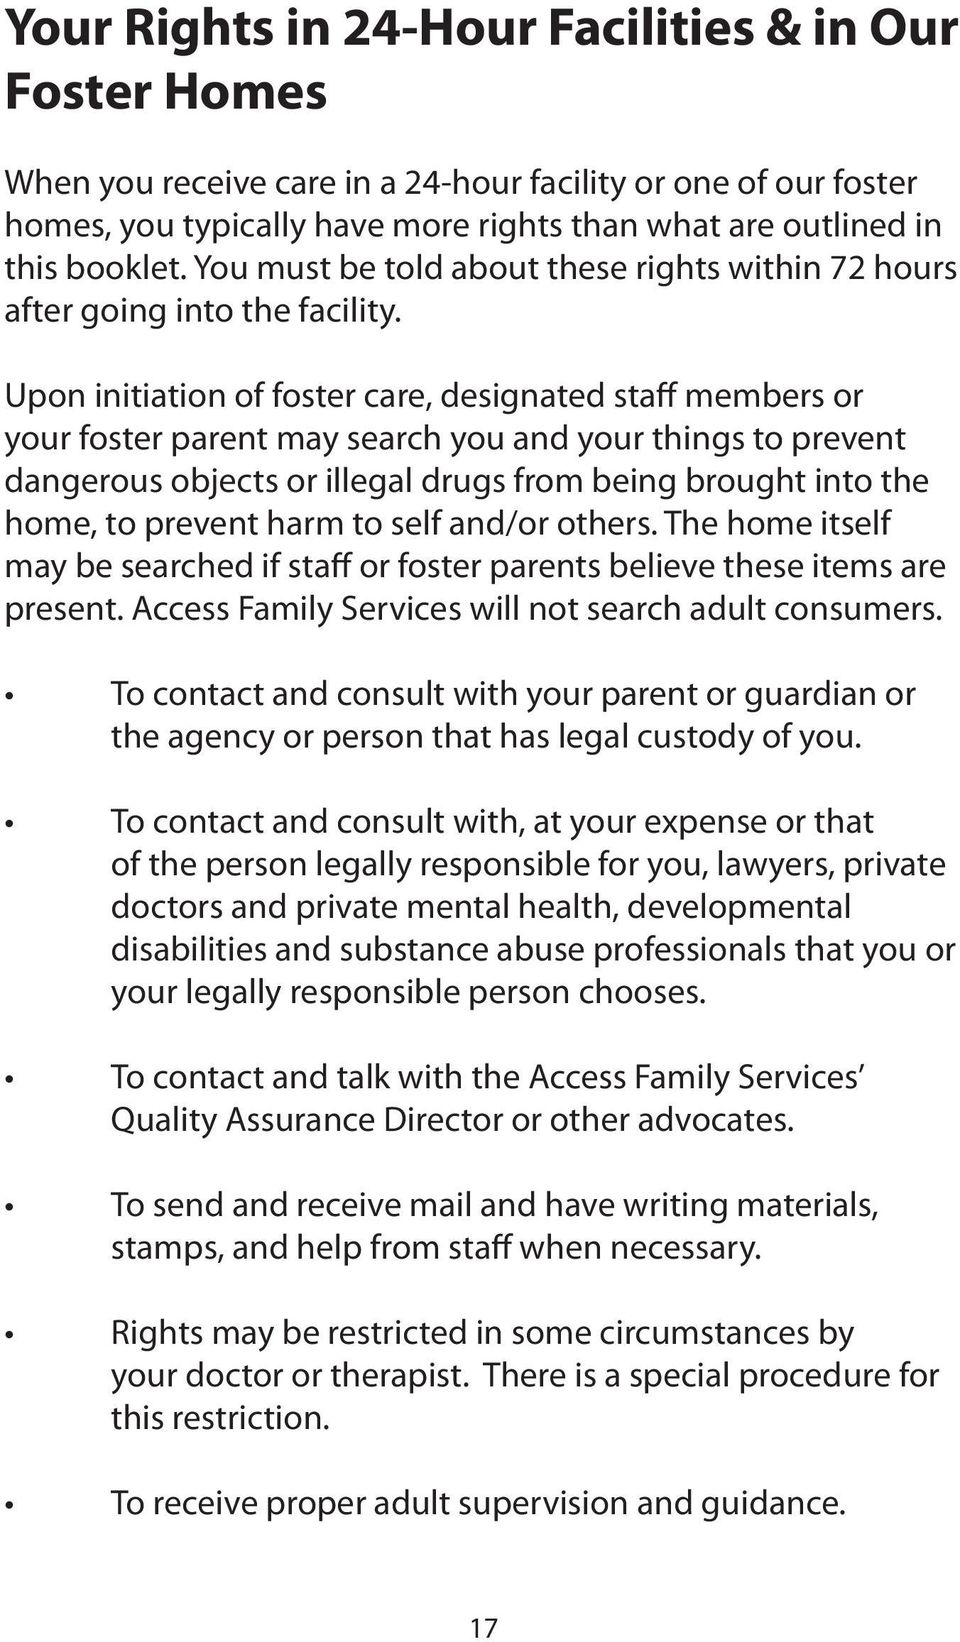 Upon initiation of foster care, designated staff members or your foster parent may search you and your things to prevent dangerous objects or illegal drugs from being brought into the home, to